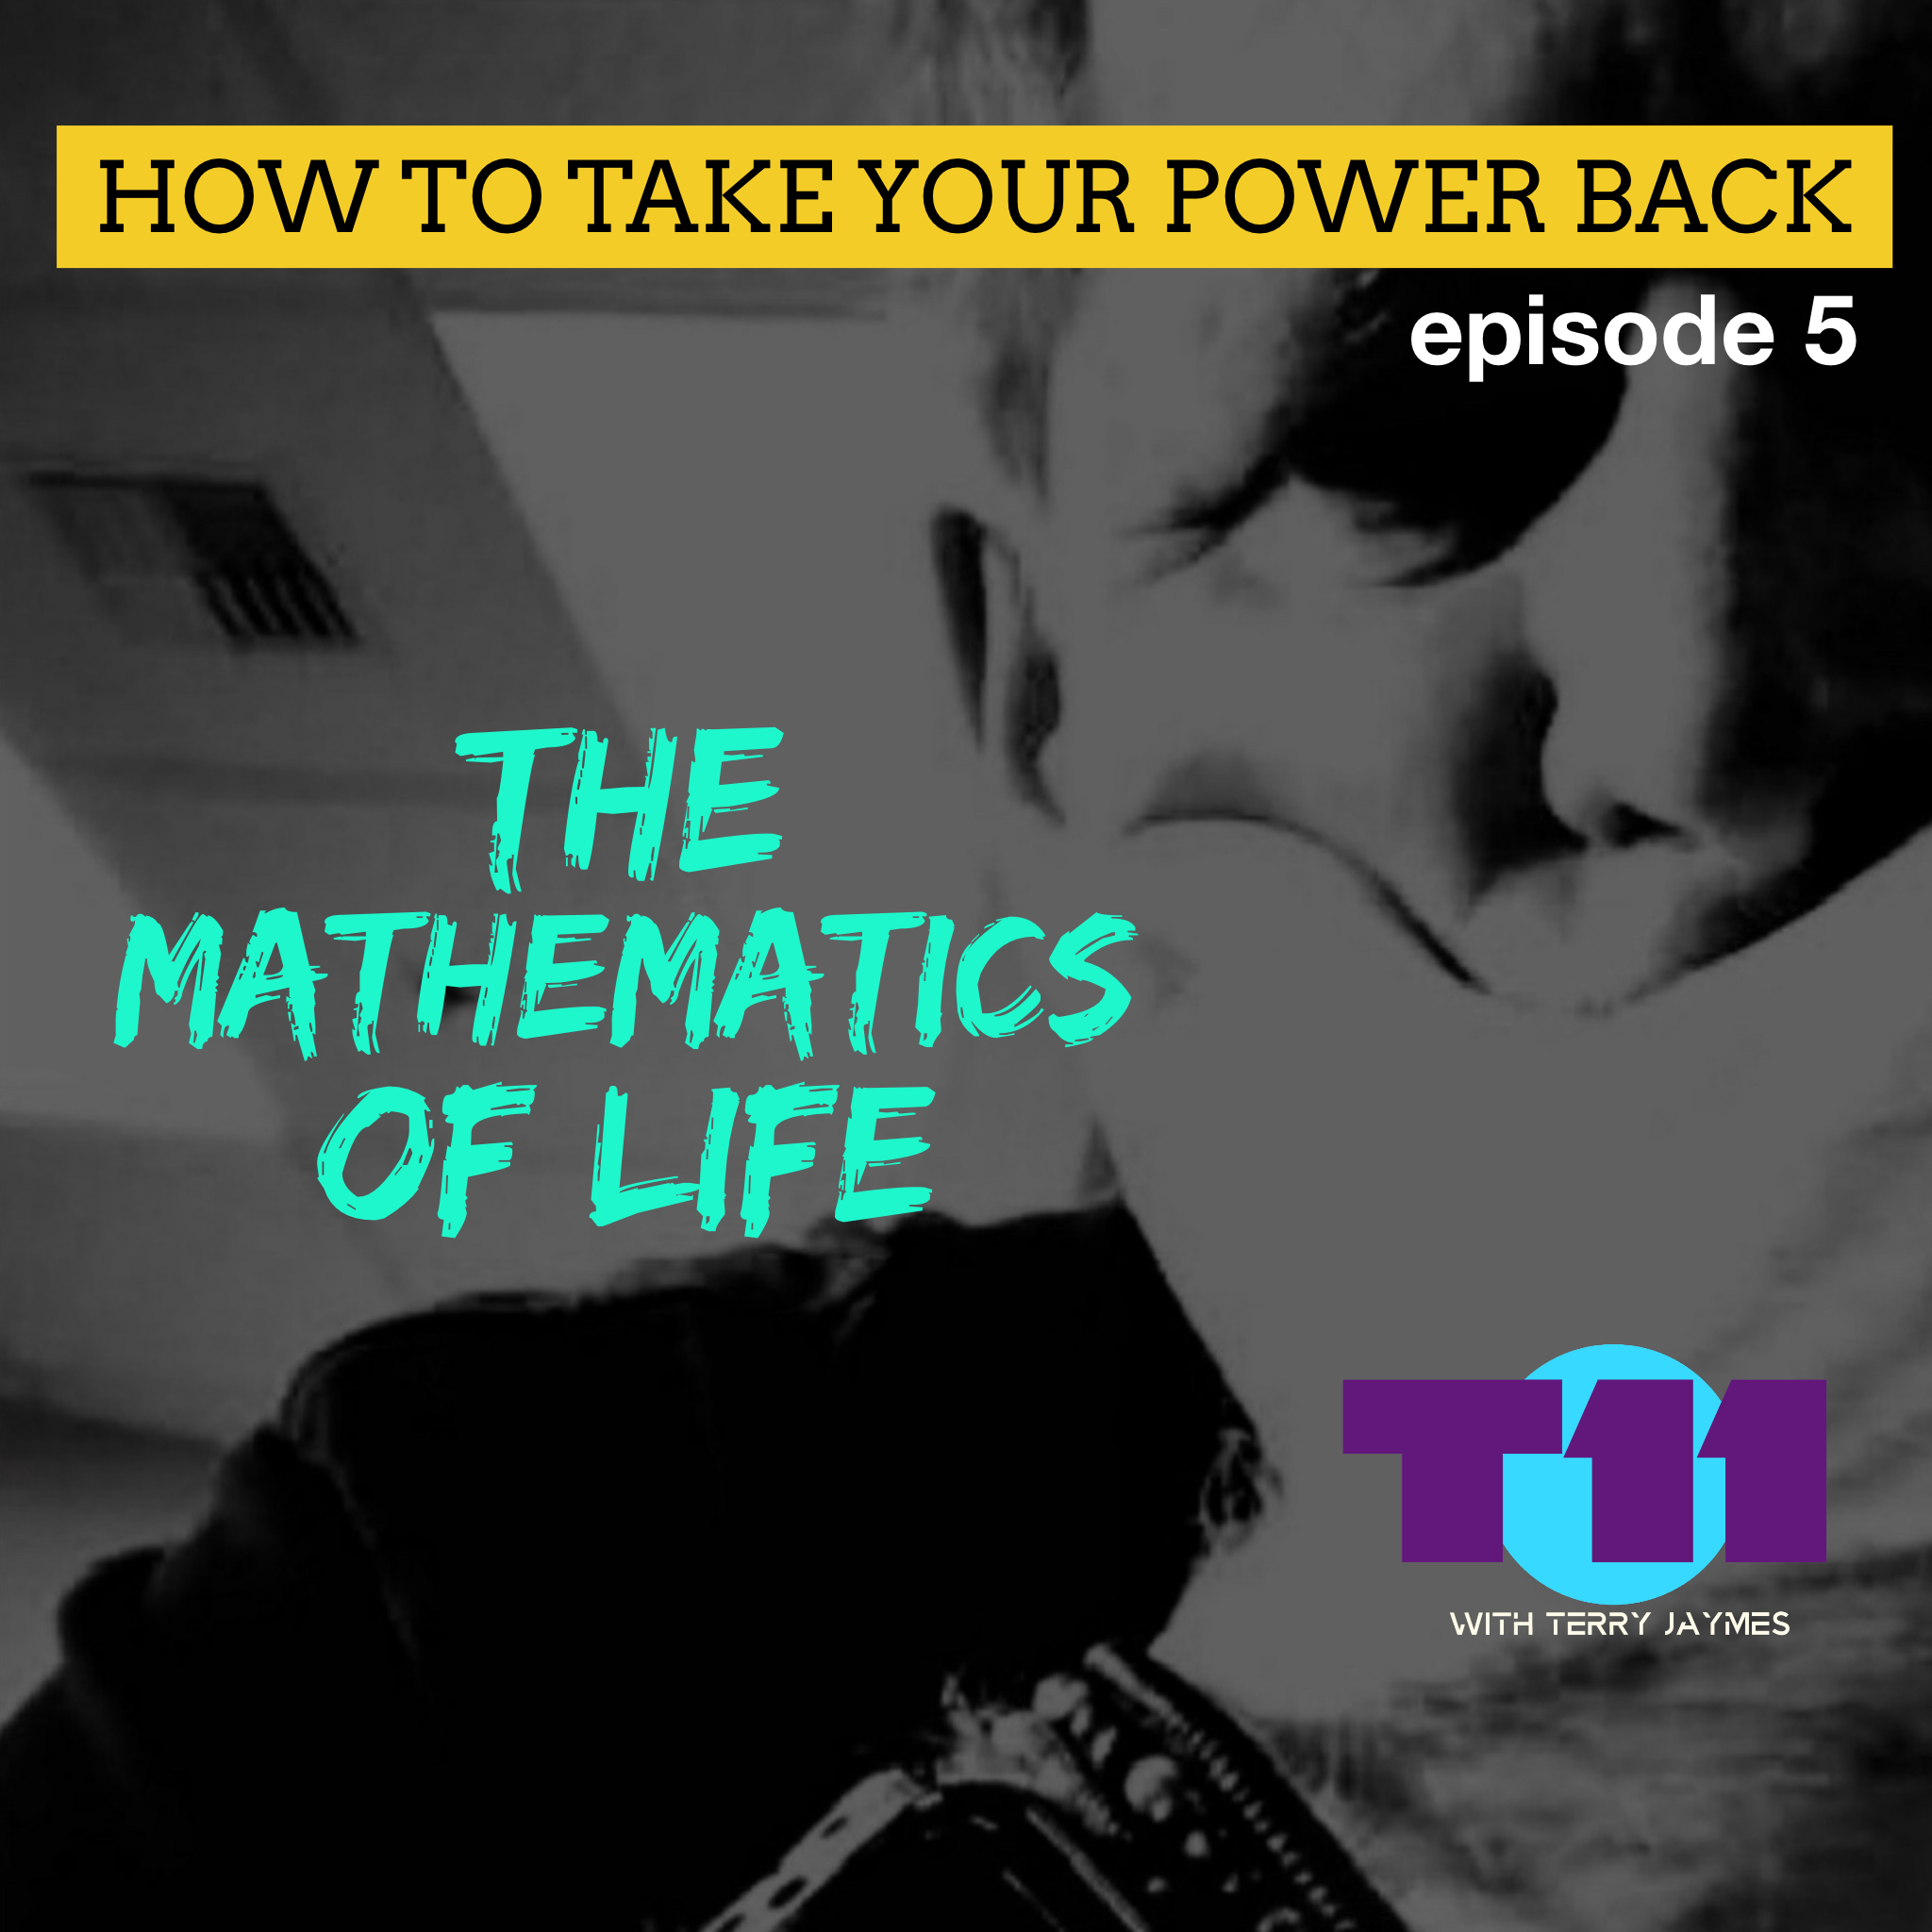 HOW TO TAKE YOUR POWER BACK episode 5 - THE MATHEMATICS OF LIFE